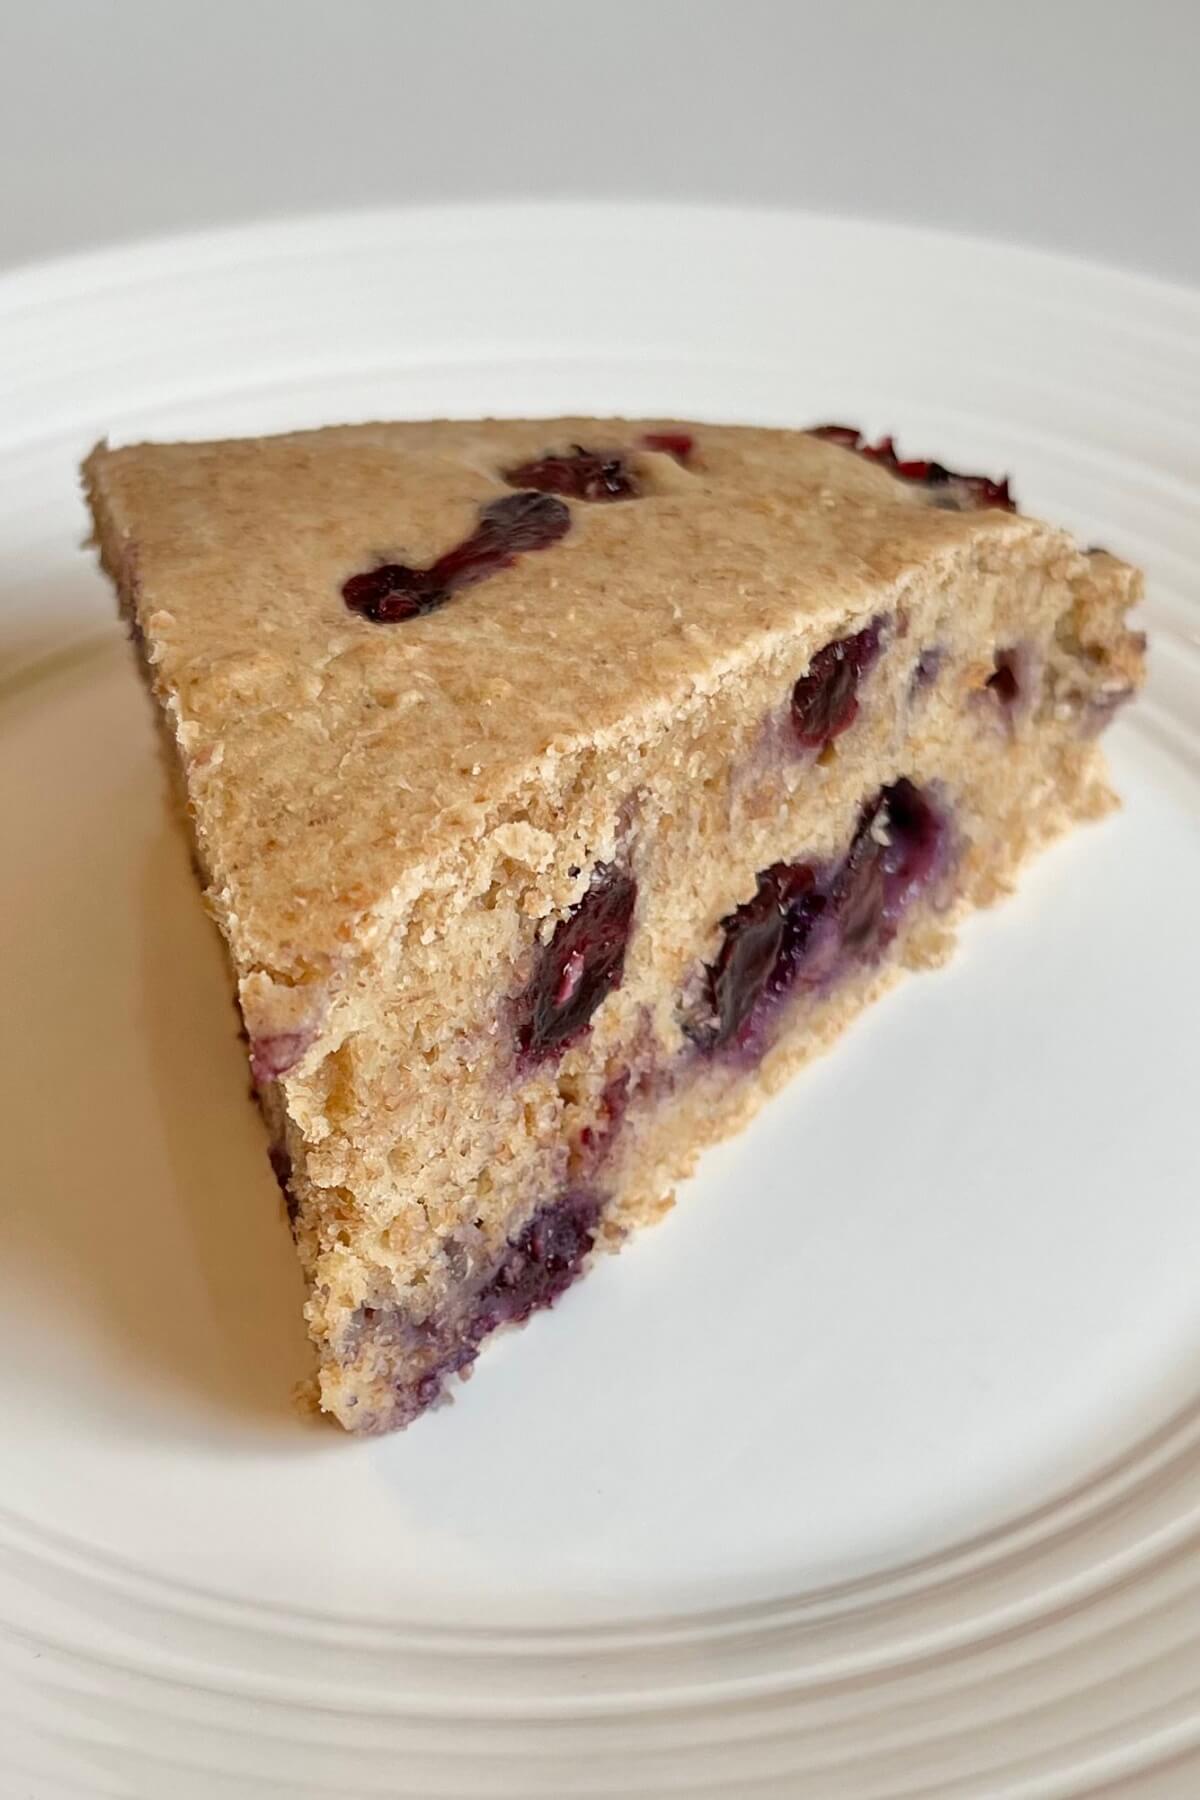 A large slice of blueberry cake on a plate.